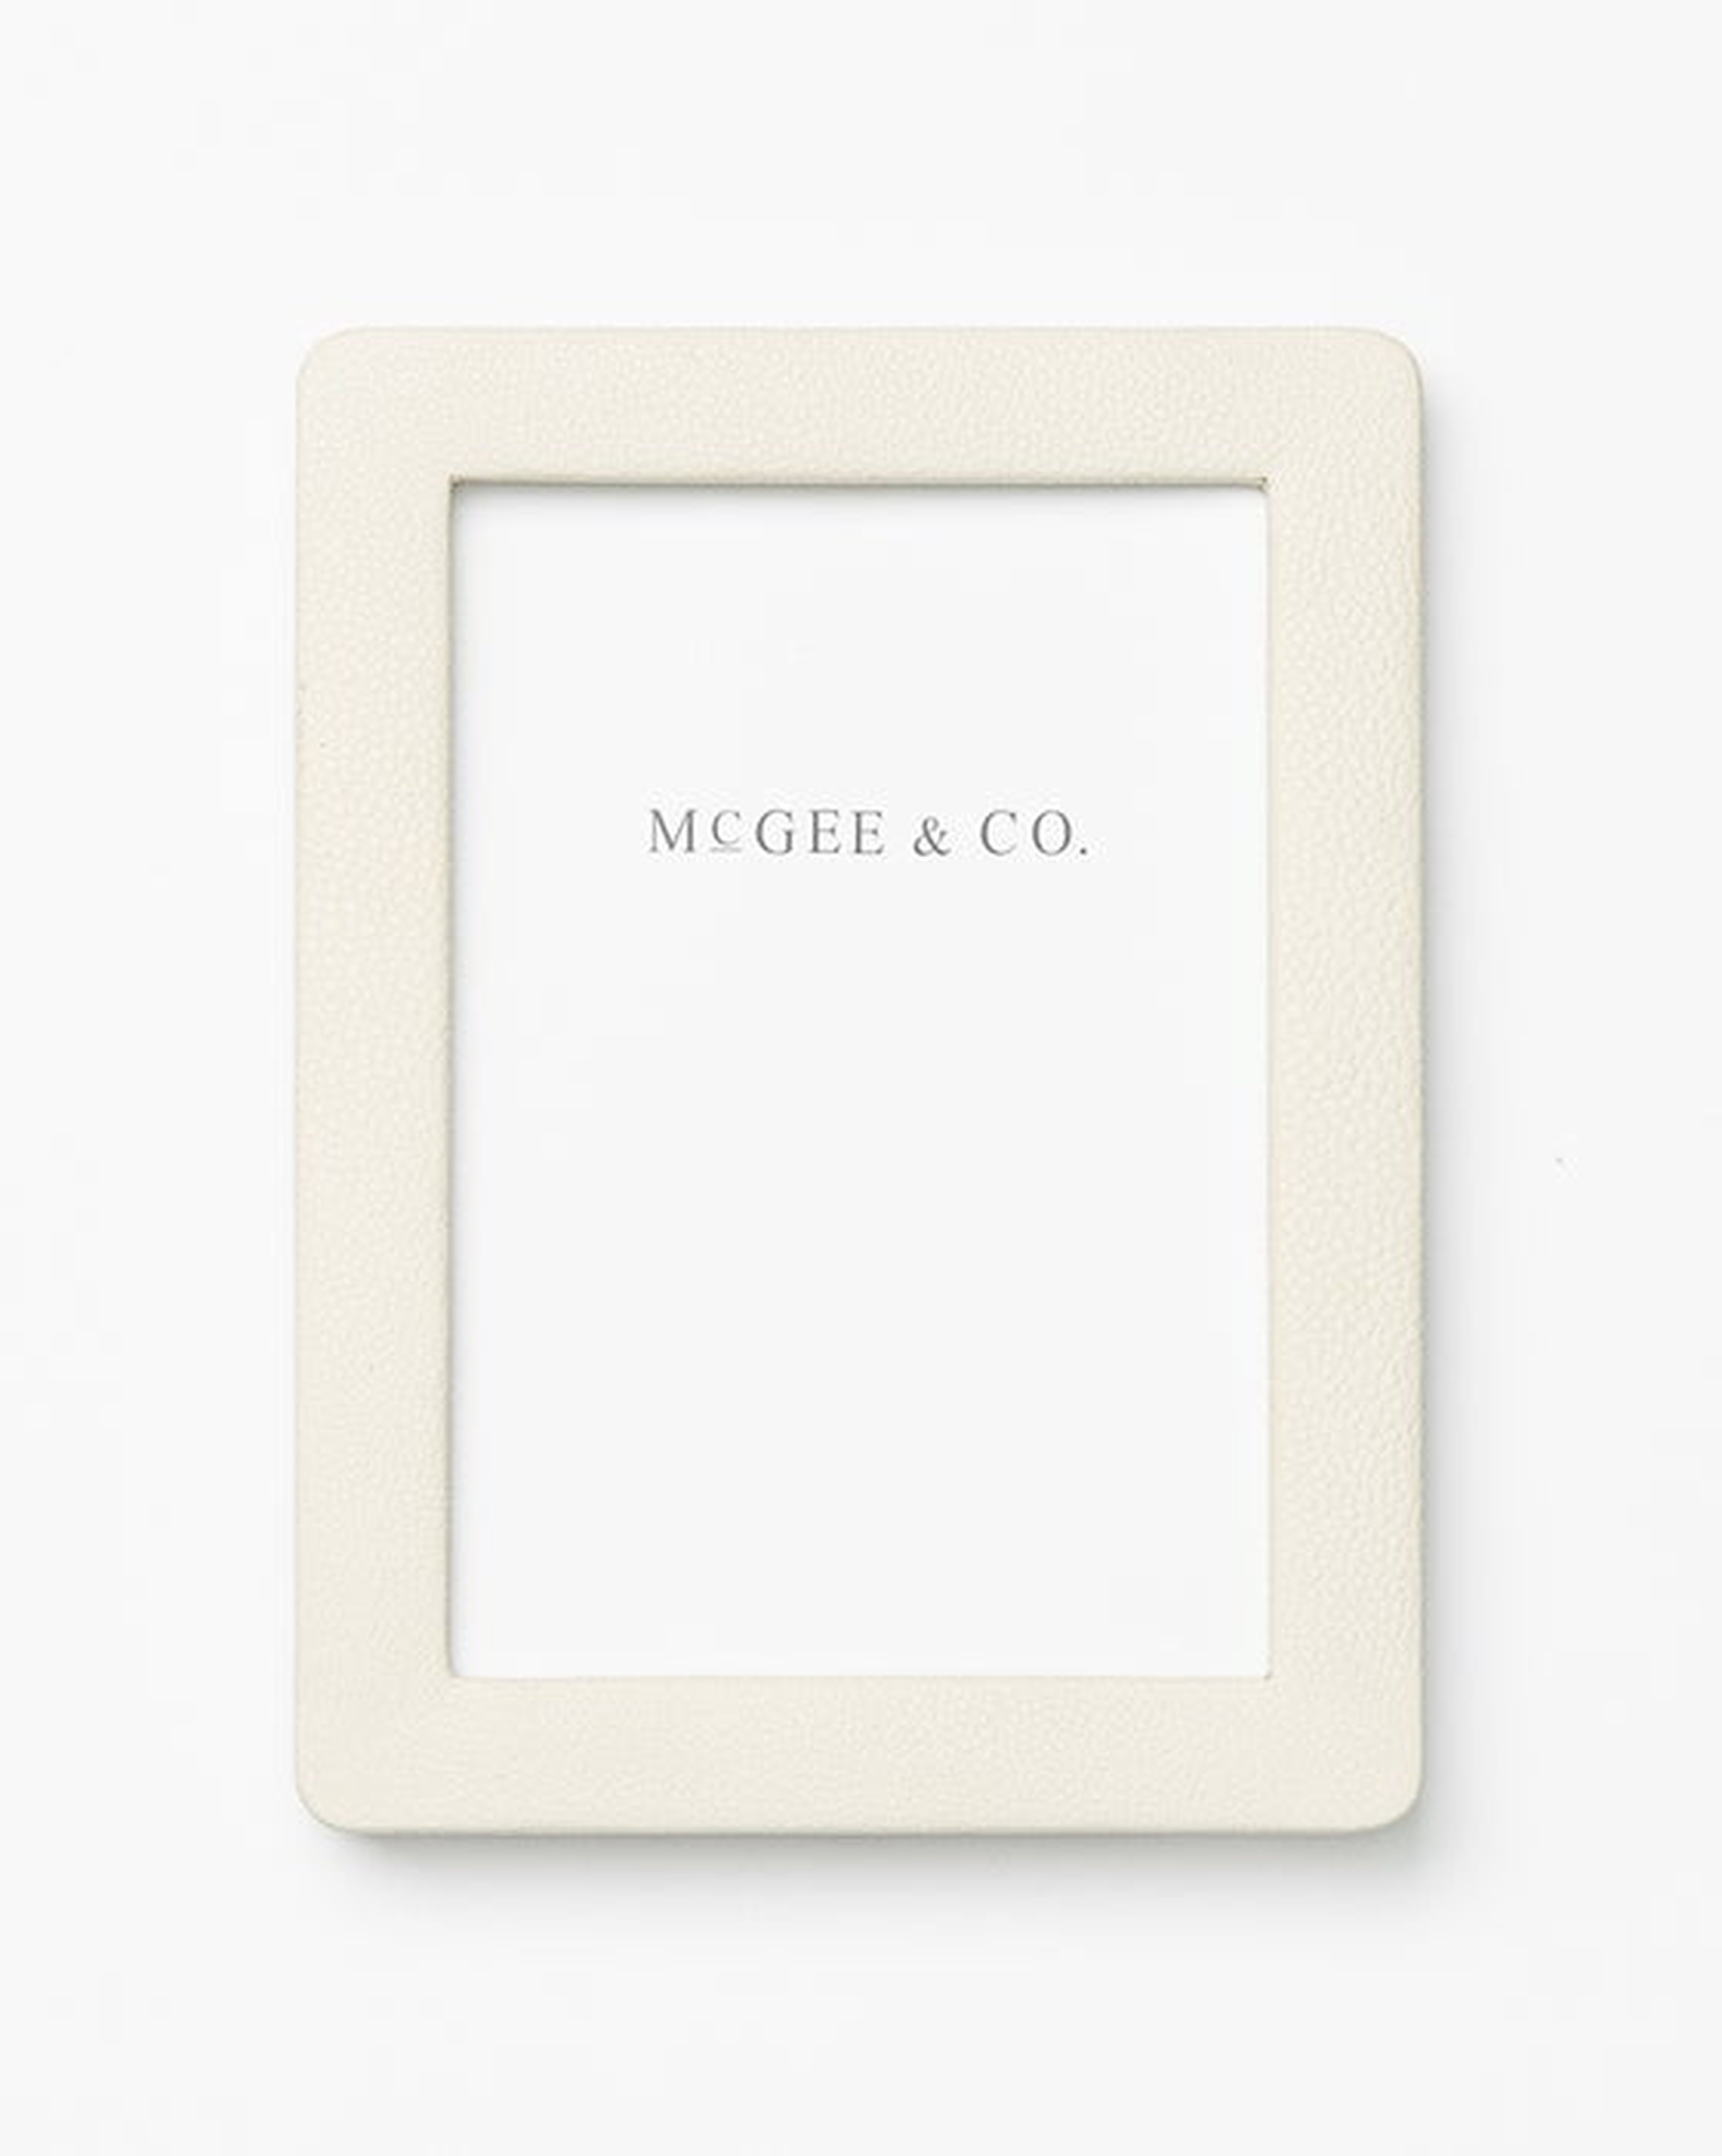 Shagreen Picture Frame - McGee & Co.